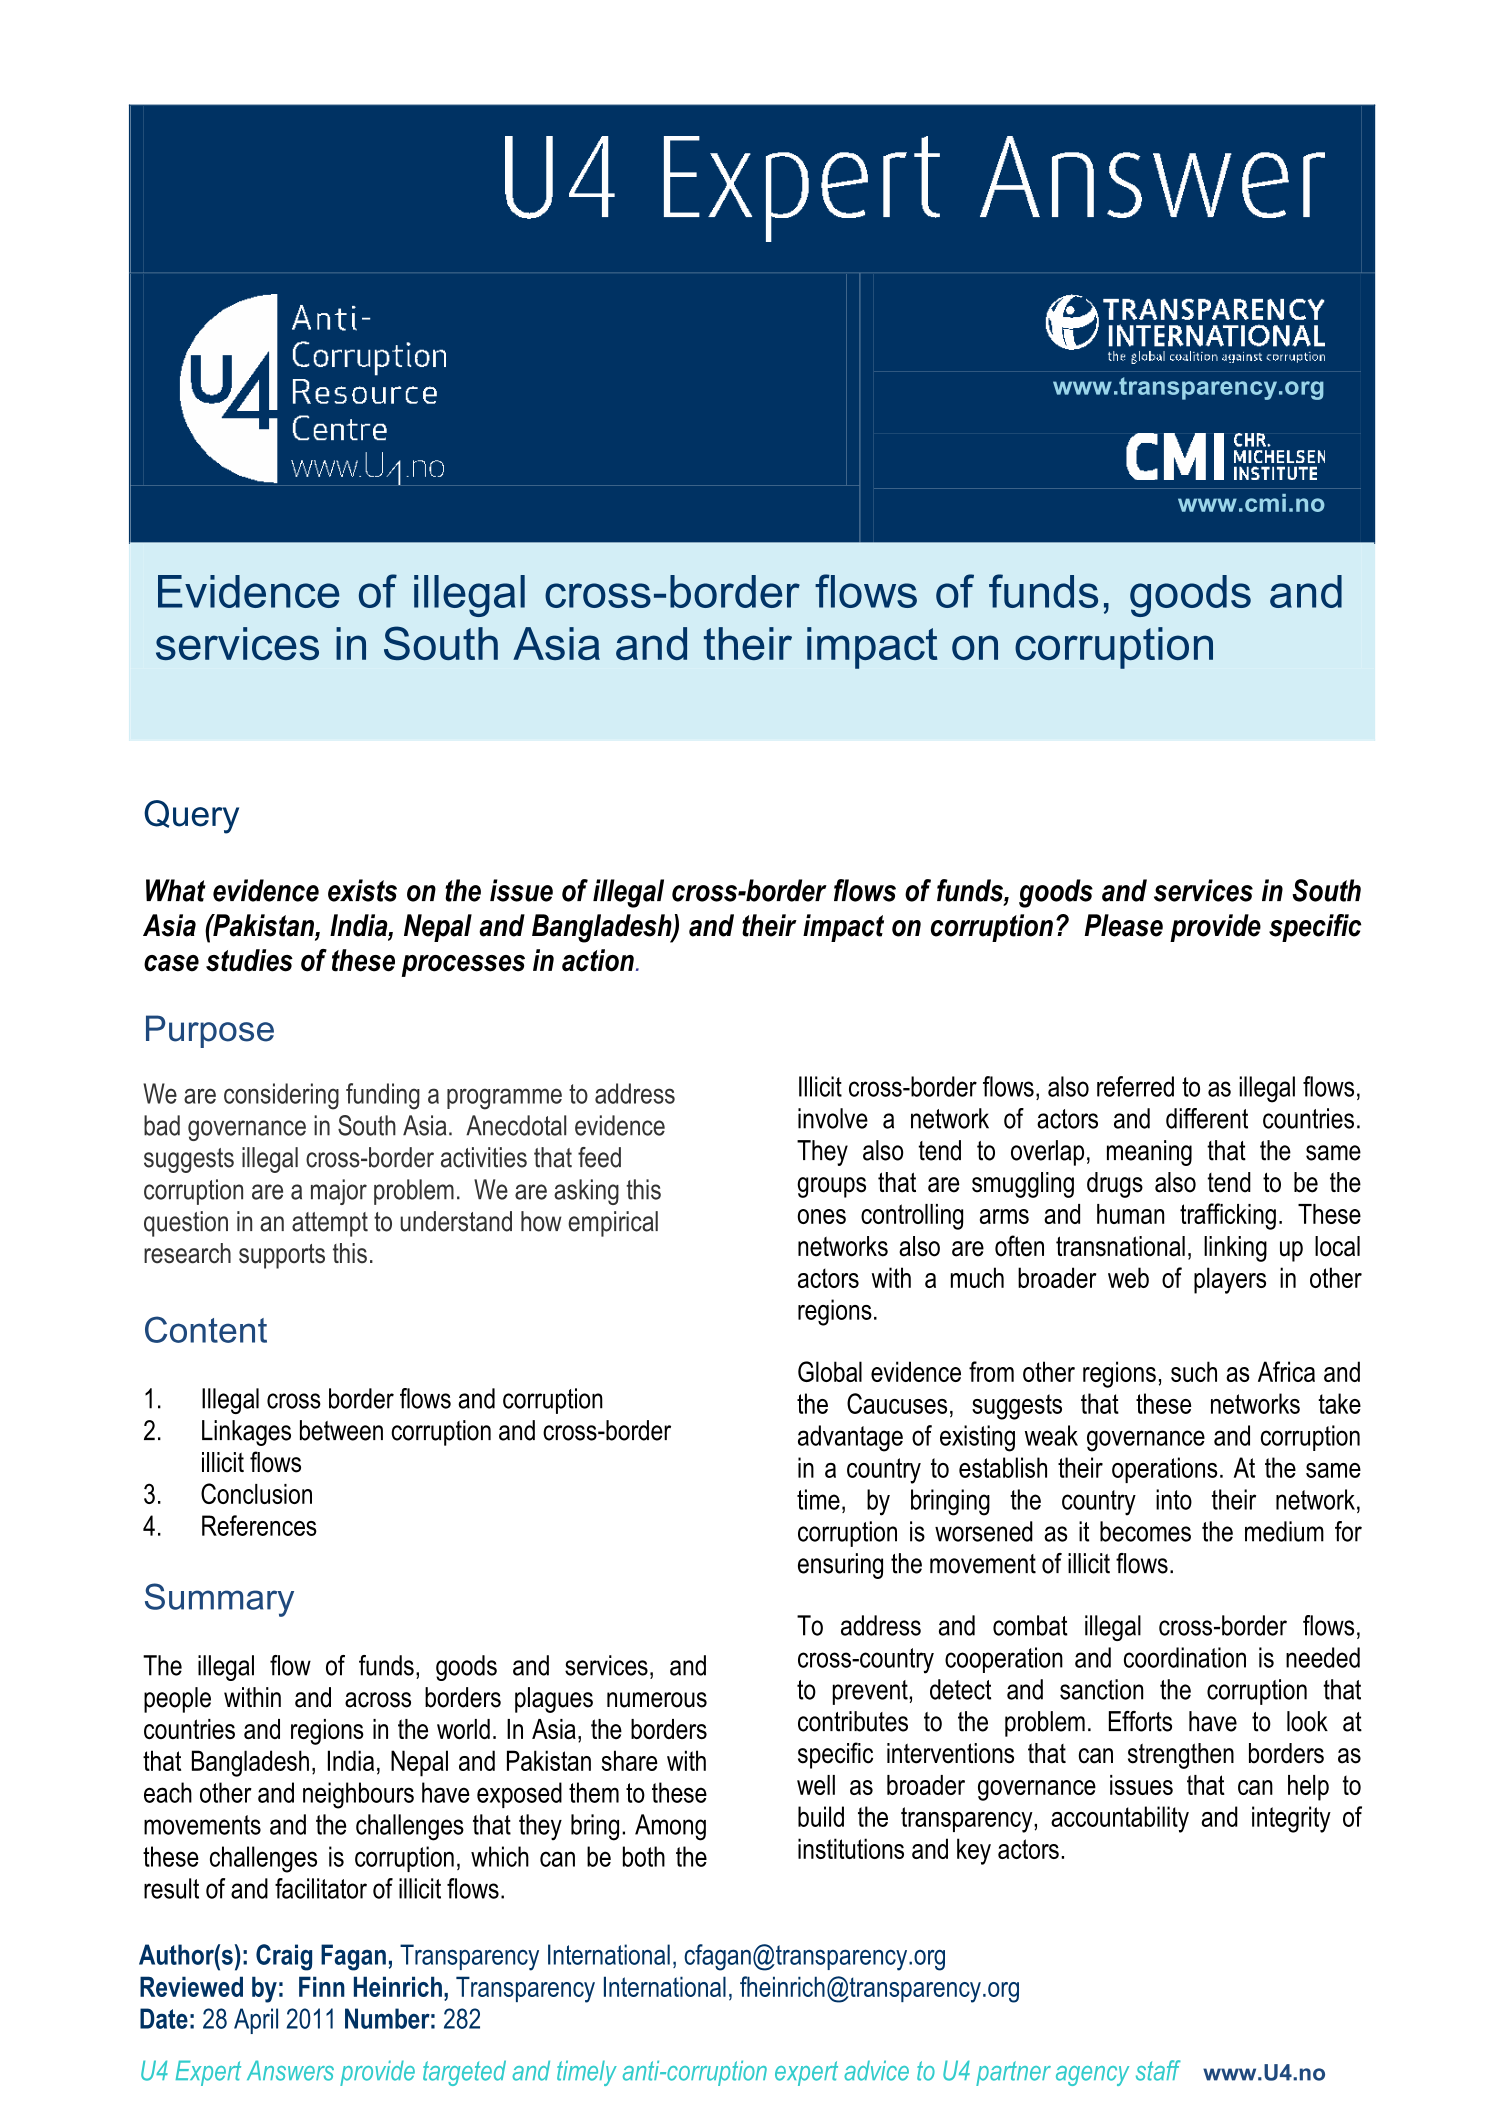 Evidence of illegal cross-border flows in South Asia and their impact on corruption